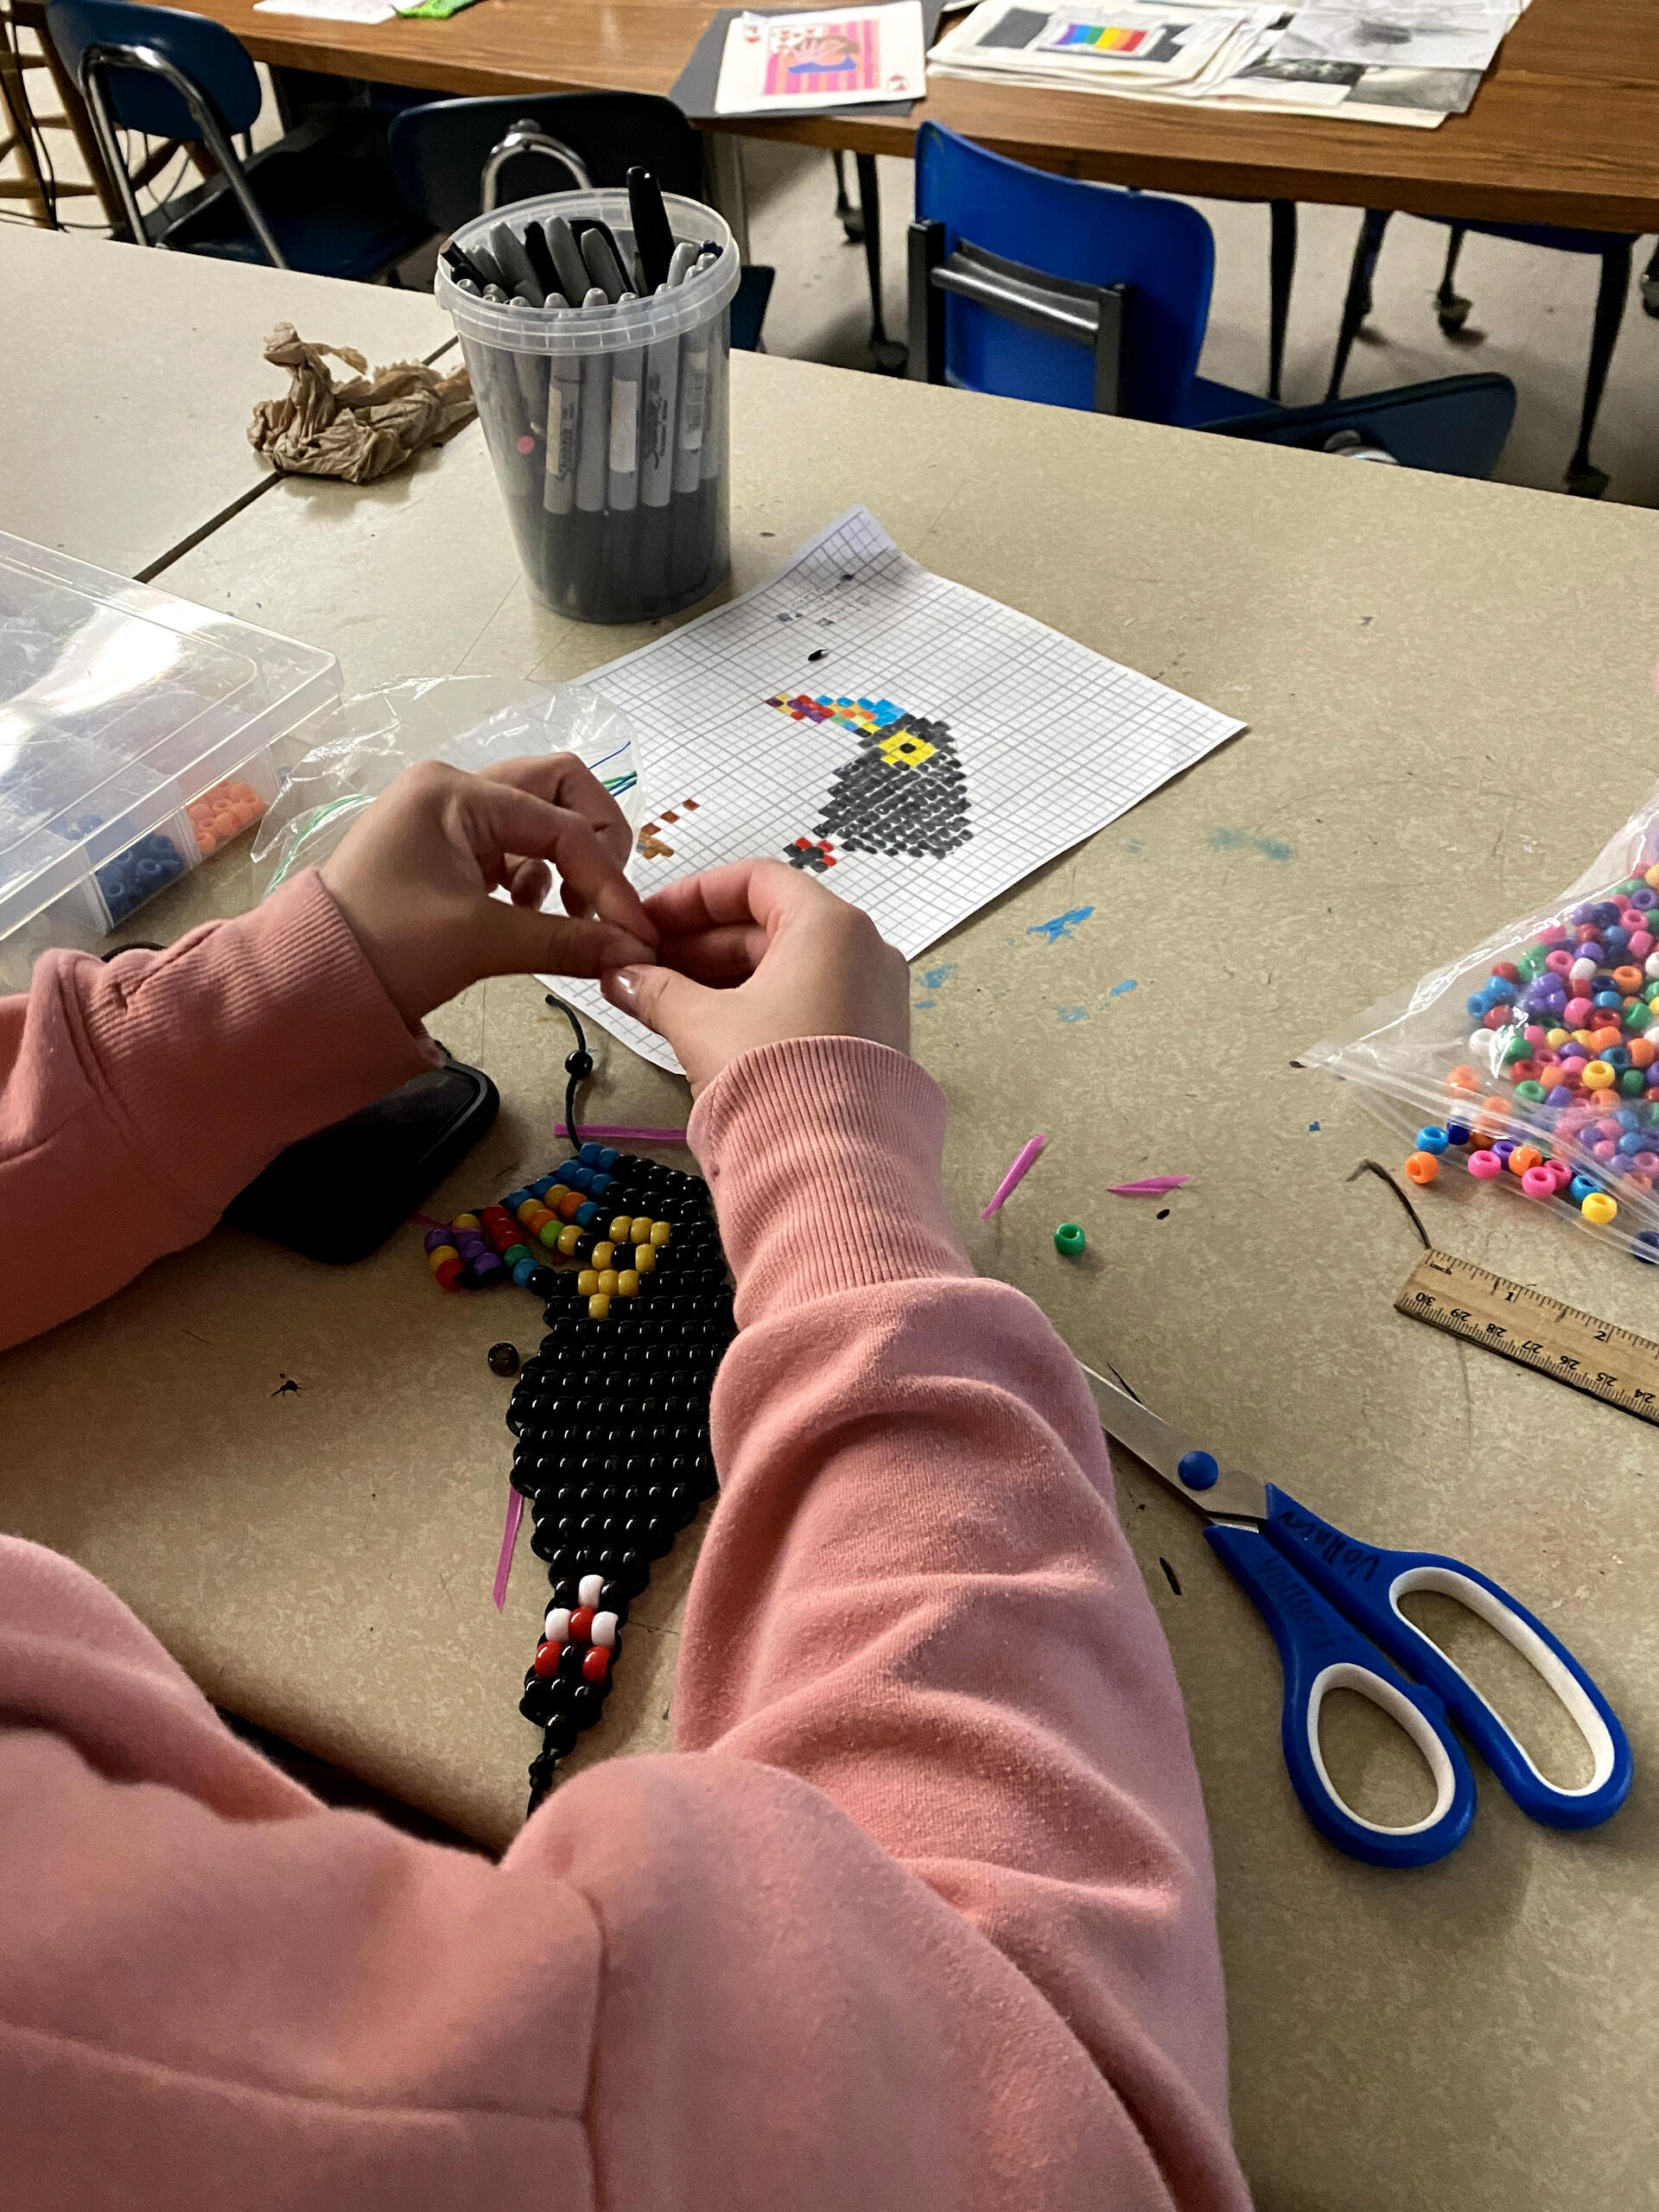 A student's hands are seen working on a pony bead toucan. A drawn design of a toucan on graph paper is seen on the desk as well. Also present are a variety of beads and markers.